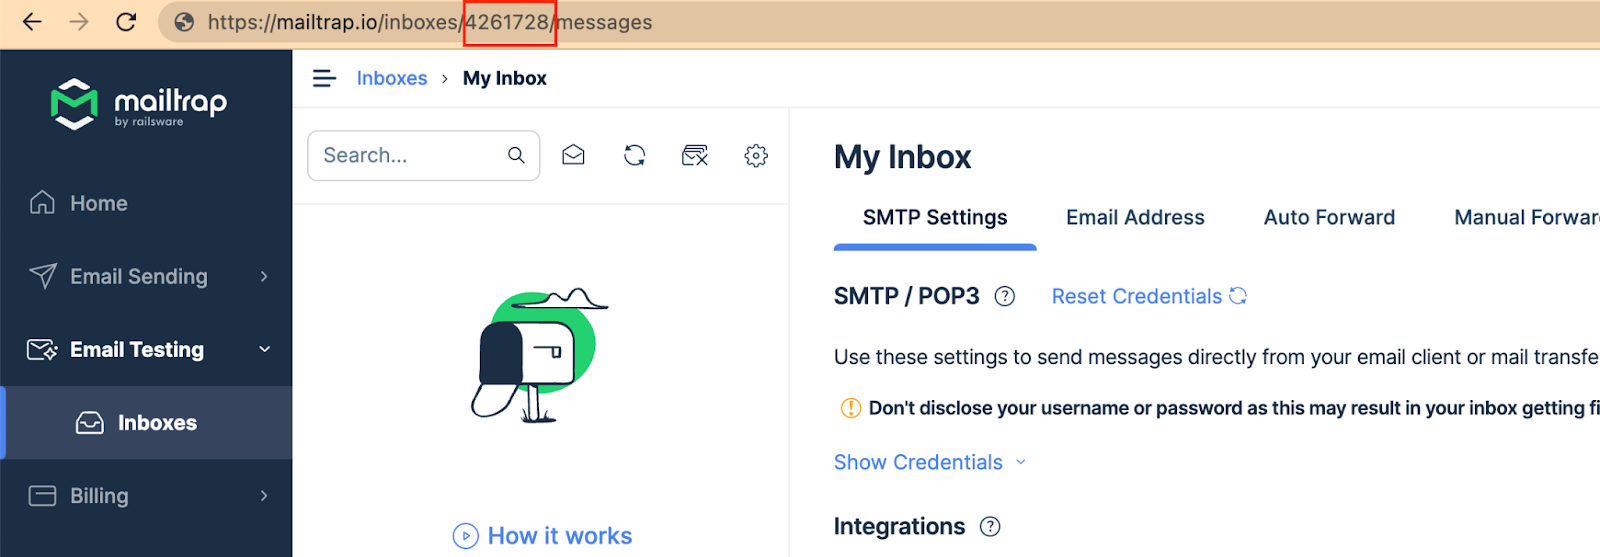 Accessing the inbox ID in Mailtrap 